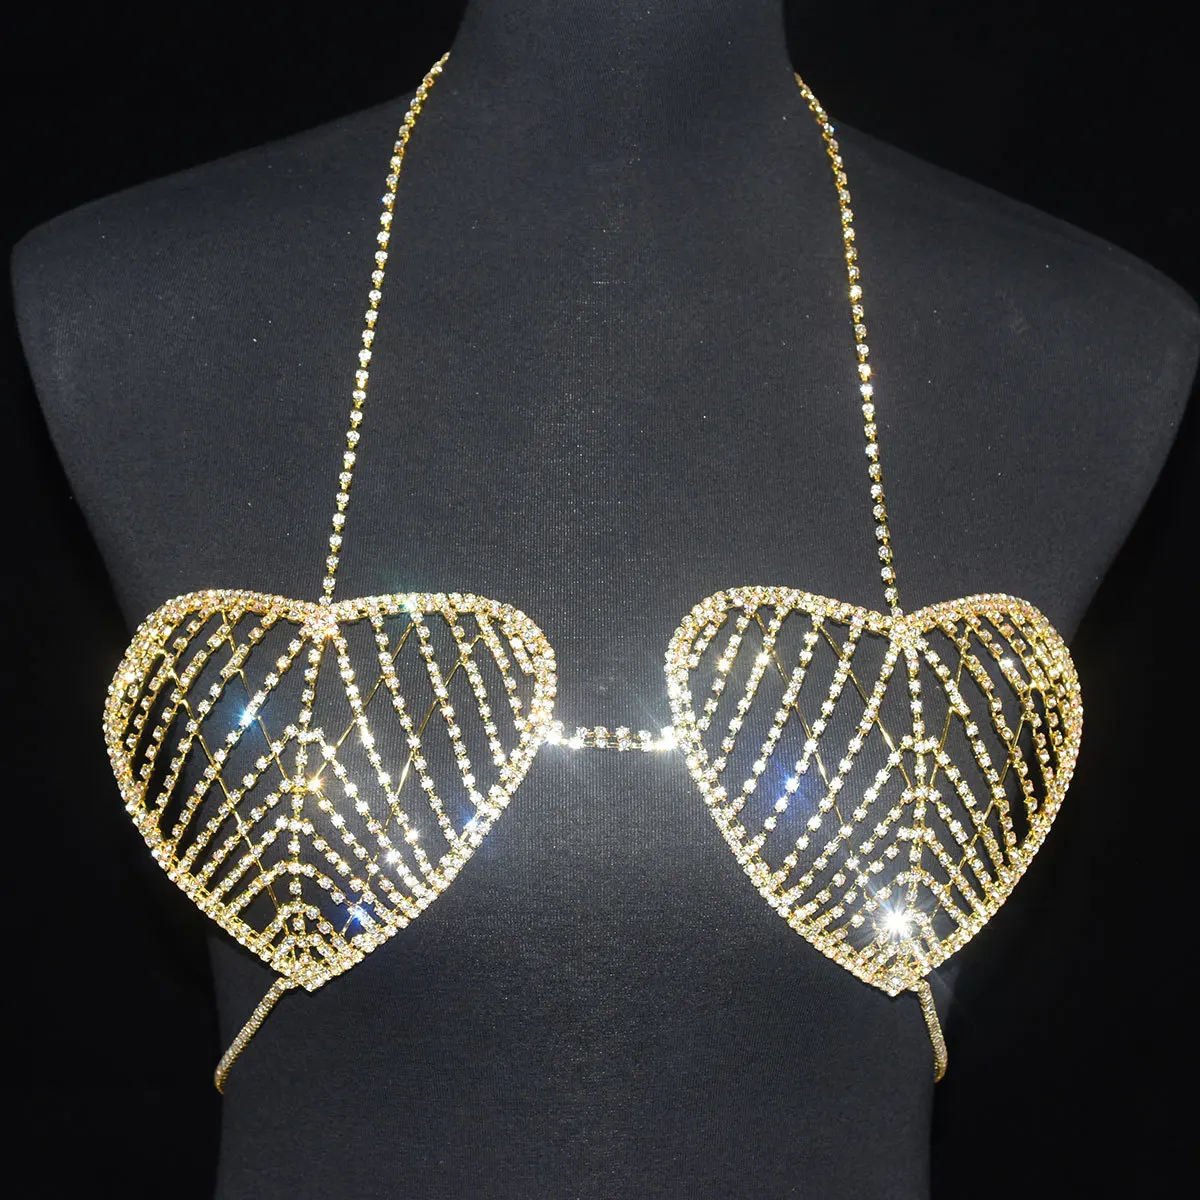 Sexy Sparkling Rhinestone Bra Heart Shaped Body Chain Heart Chest Jewelry  Hollow Out Gold Crystal Chain Necklace Bikini Bra Gift